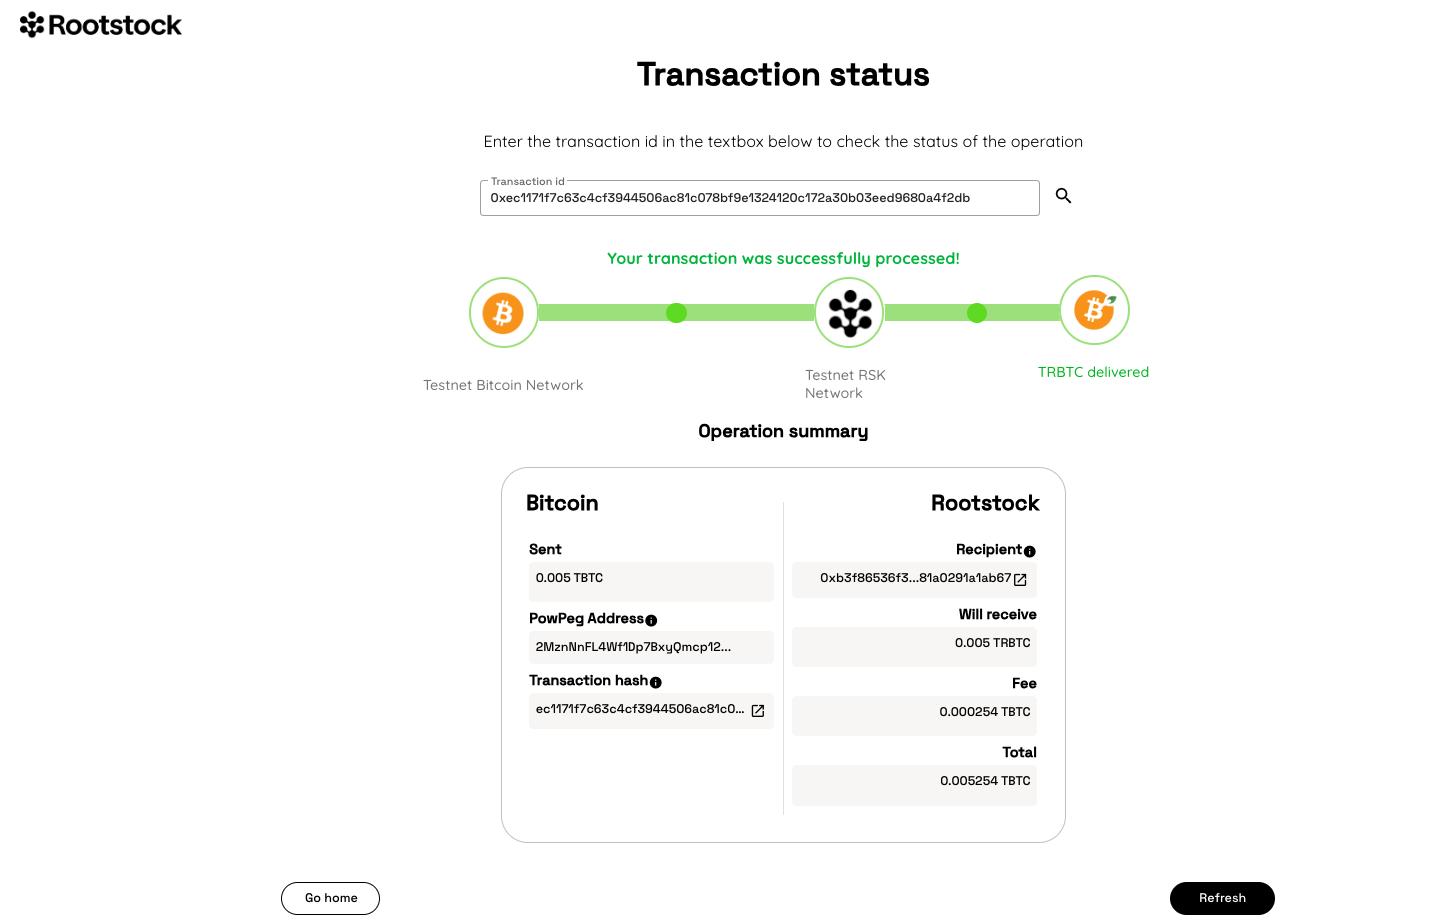 Transaction summary completed